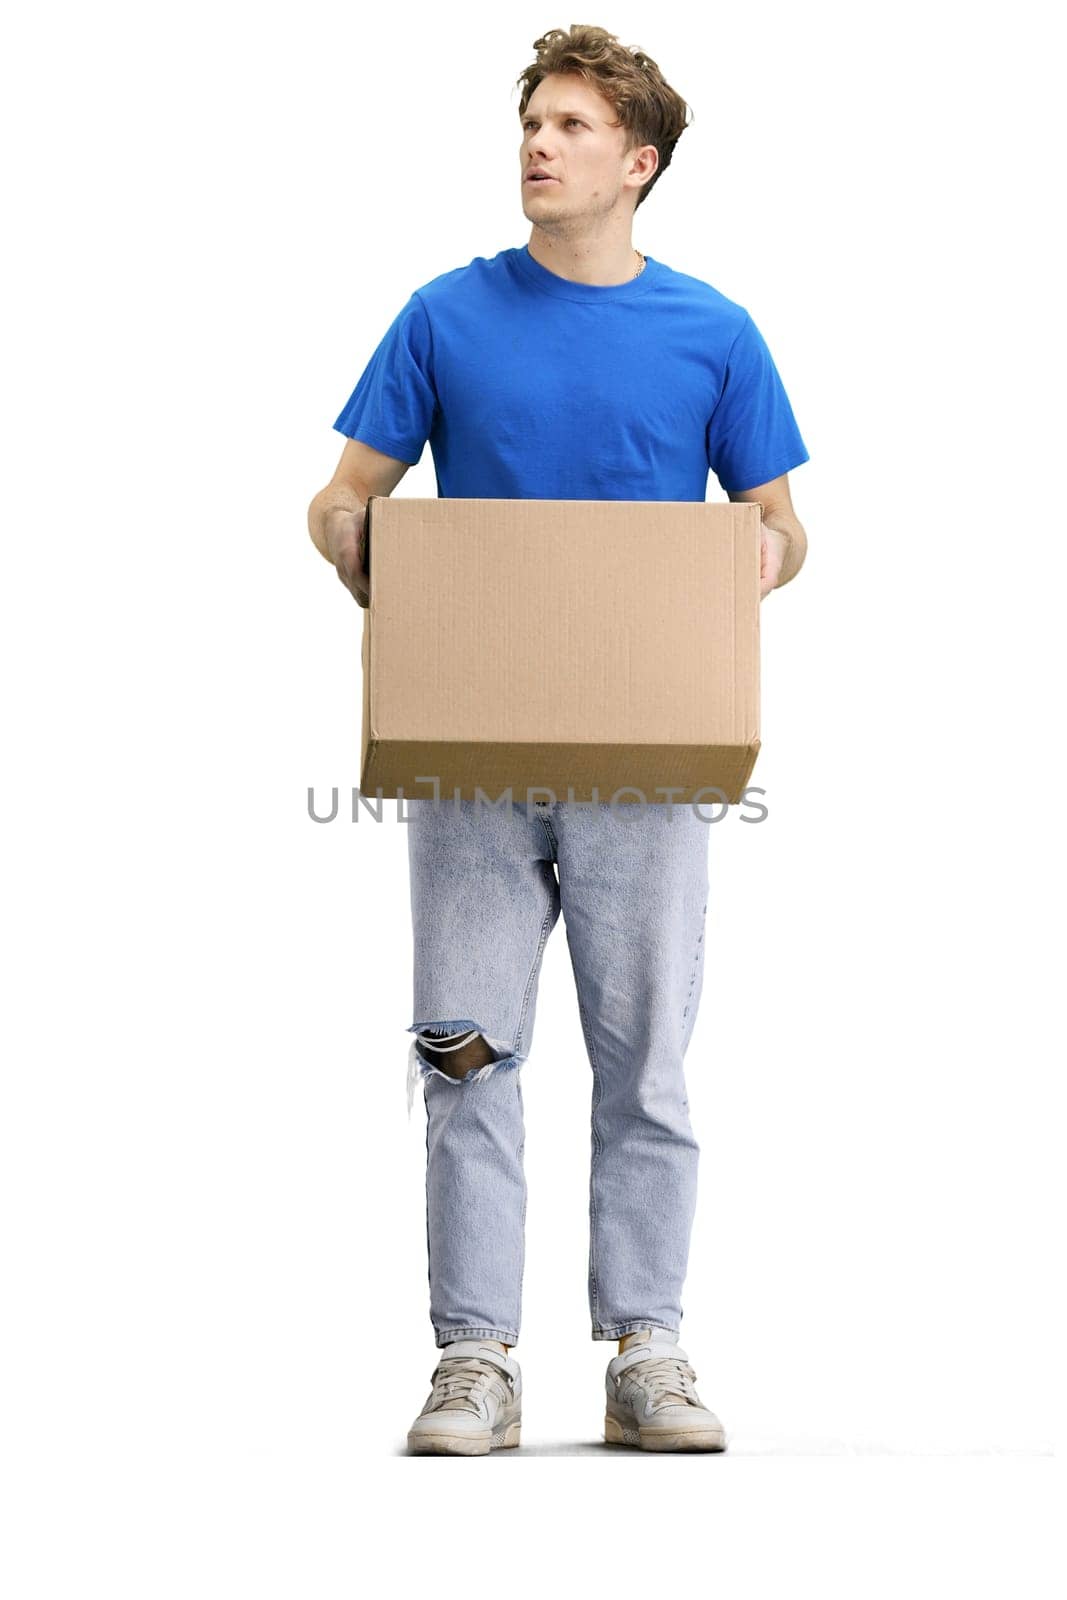 The deliveryman, full-length, on a white background, with a box by Prosto